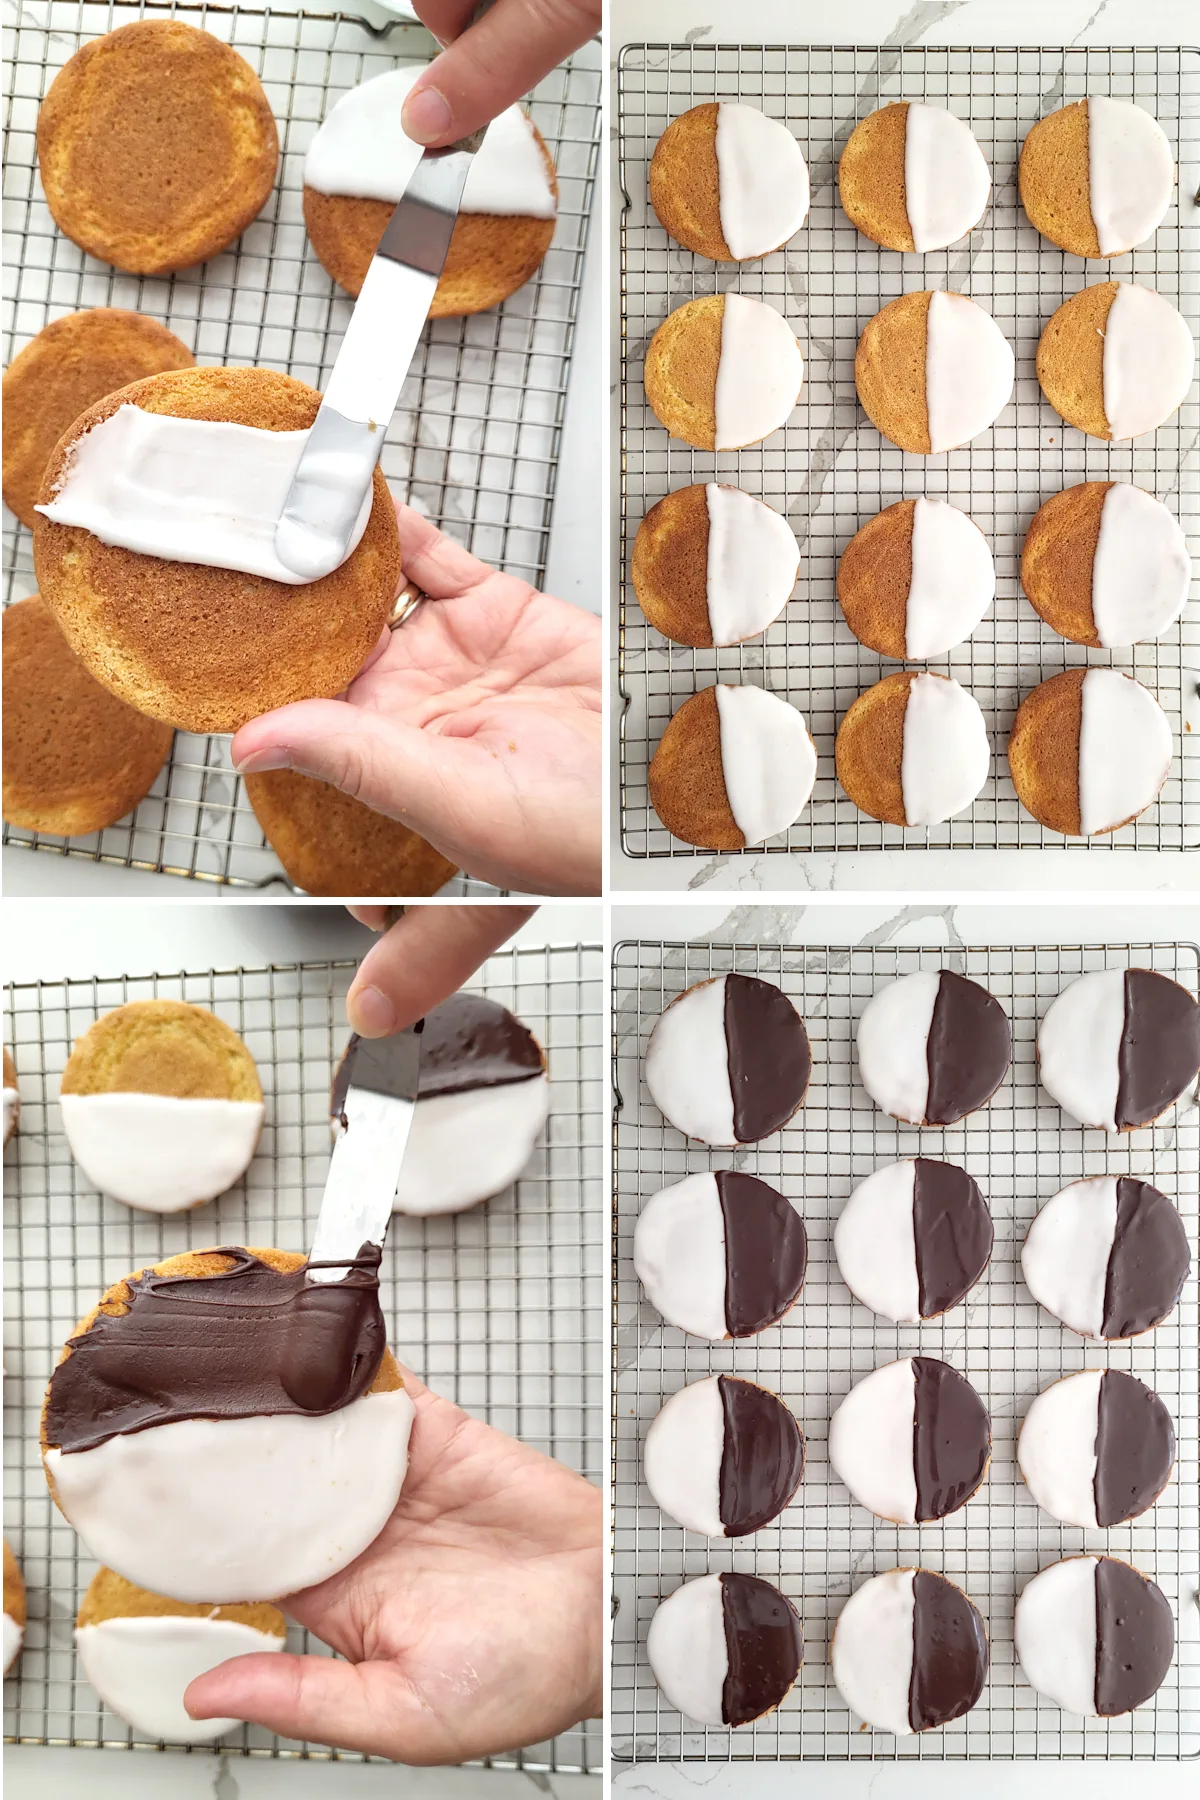 1. A spatula icing a cookie with white icing. 2.  A tray of half iced cookies. 3. Icing a cookie with chocolate icing. 4. A tray of iced black and white cookies.